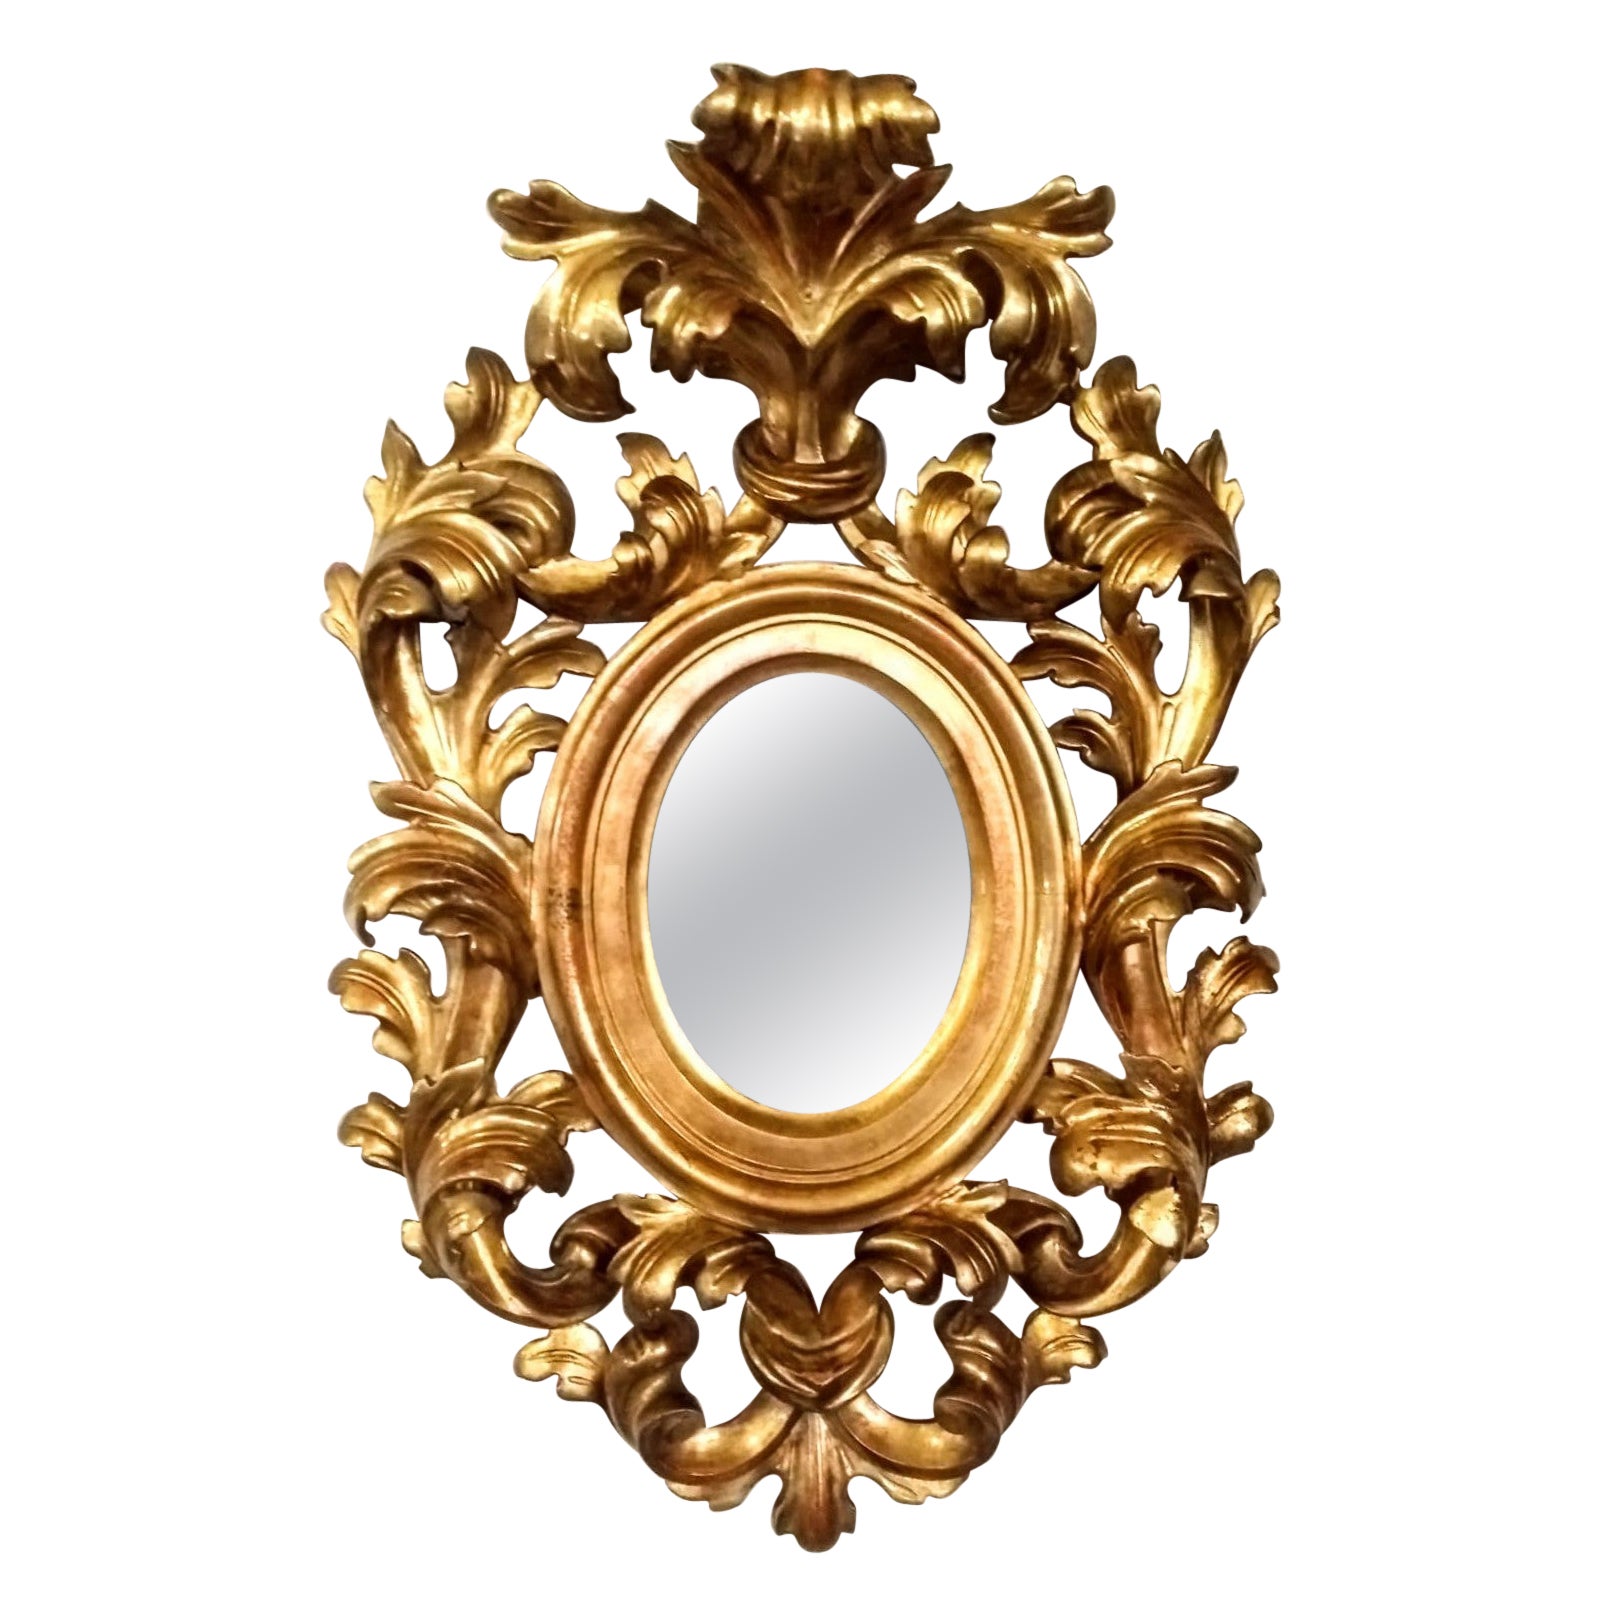 Splendid Venetian Baroque Frame with Mirror, Gold Leaf, Early 18th Century For Sale